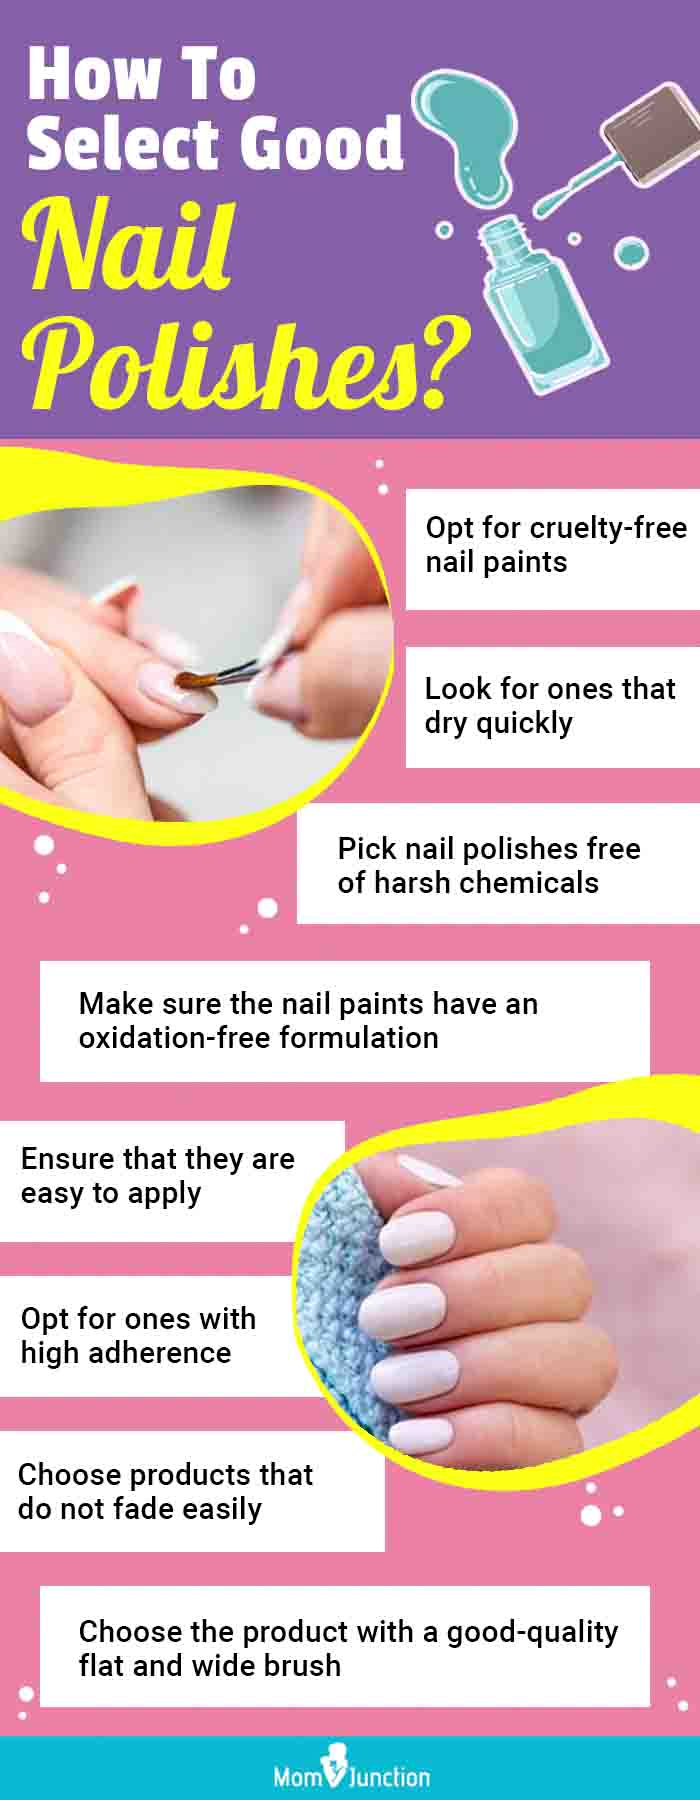 How To Select Good Nail Polishes (infographic)